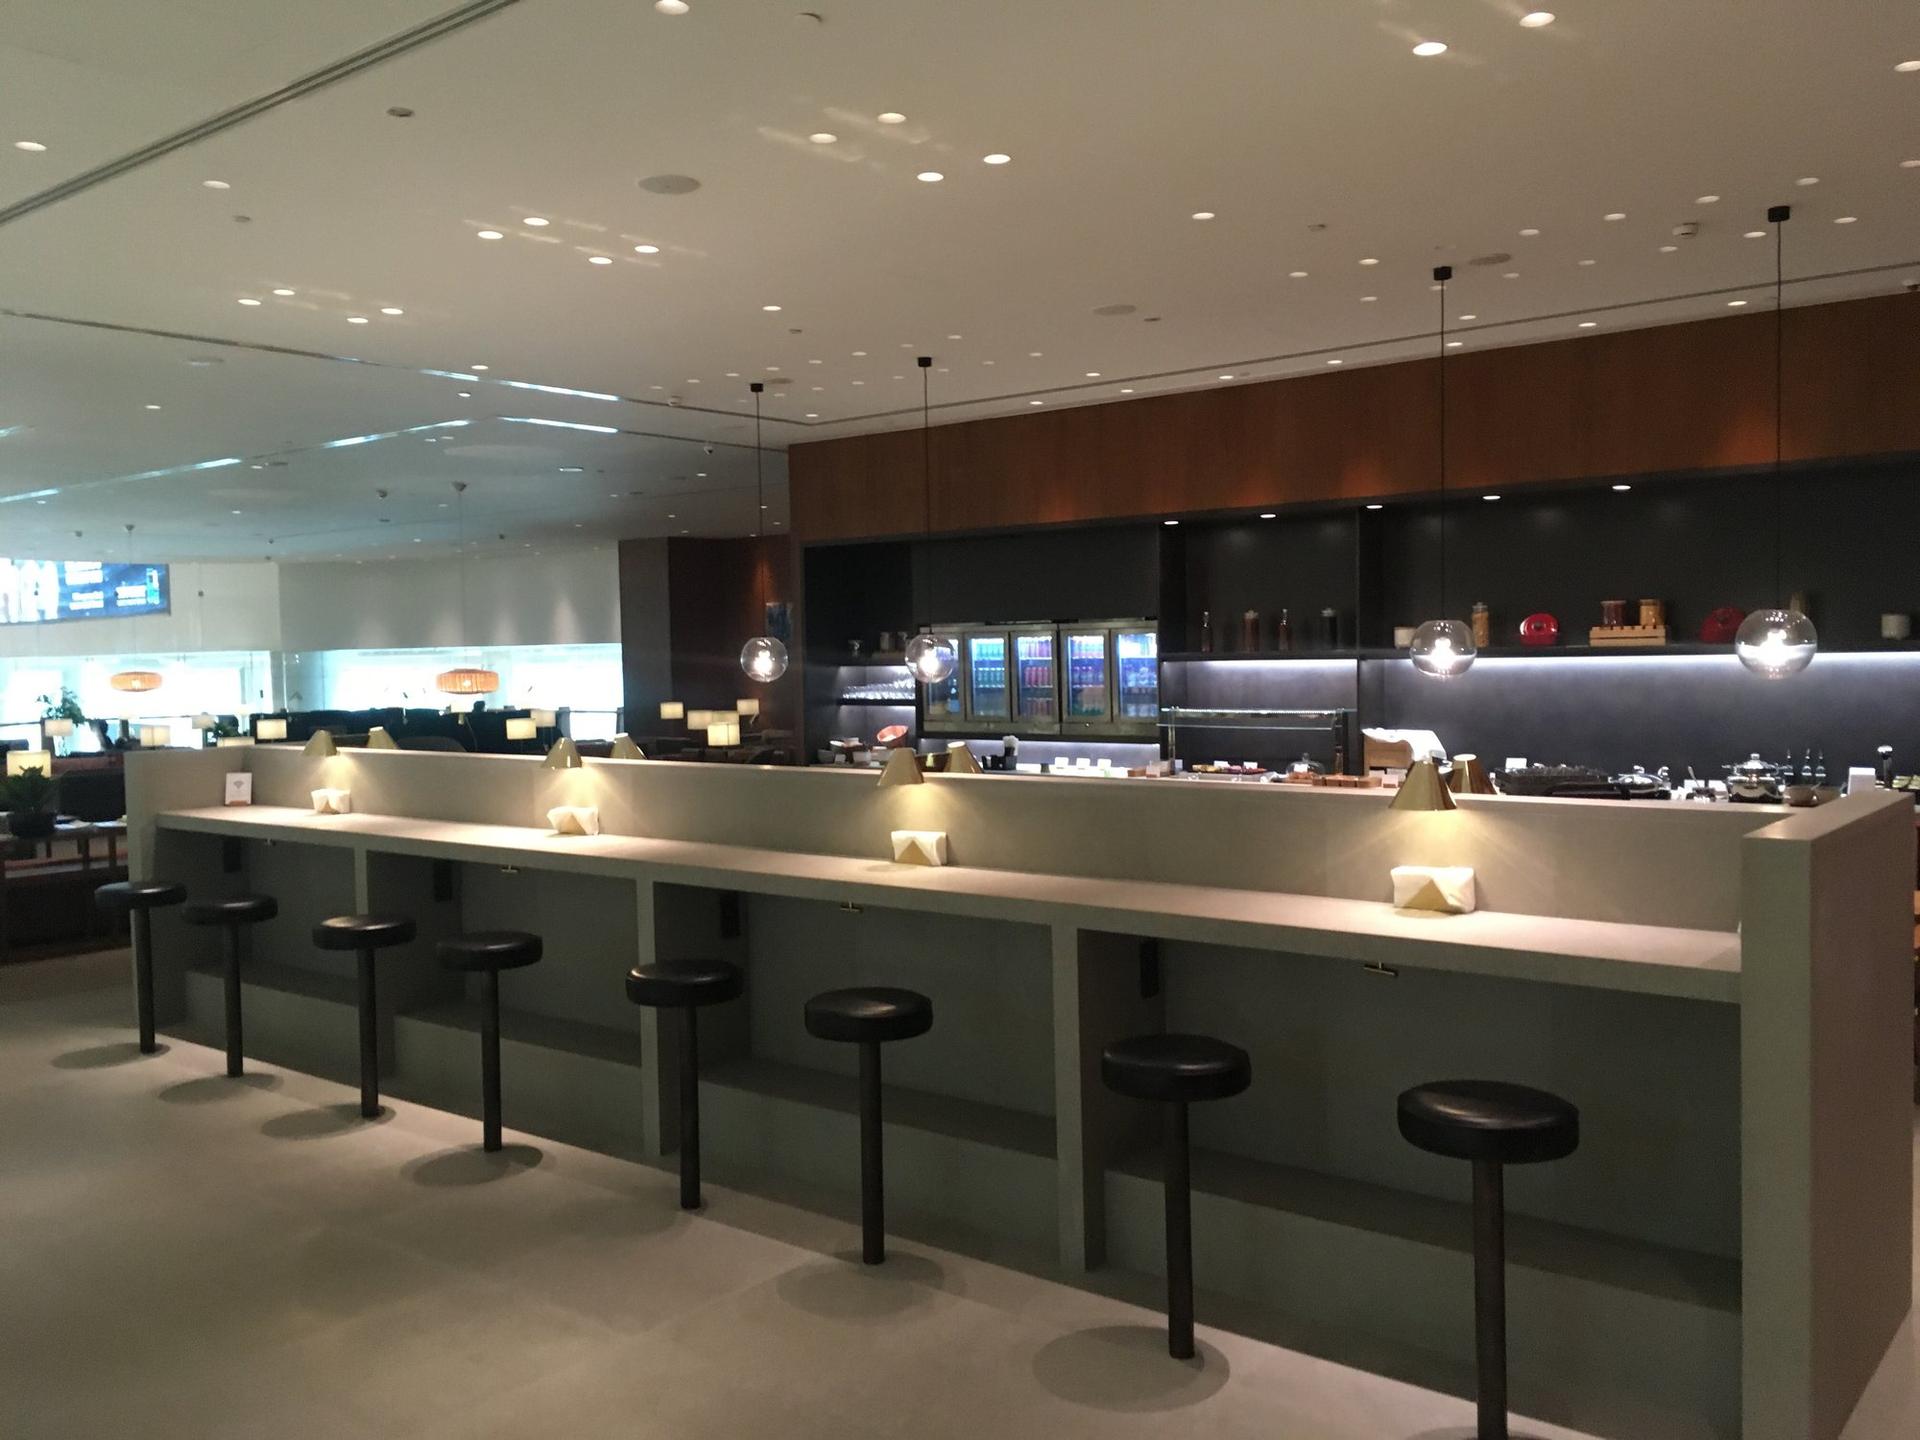 Cathay Pacific Lounge image 51 of 60